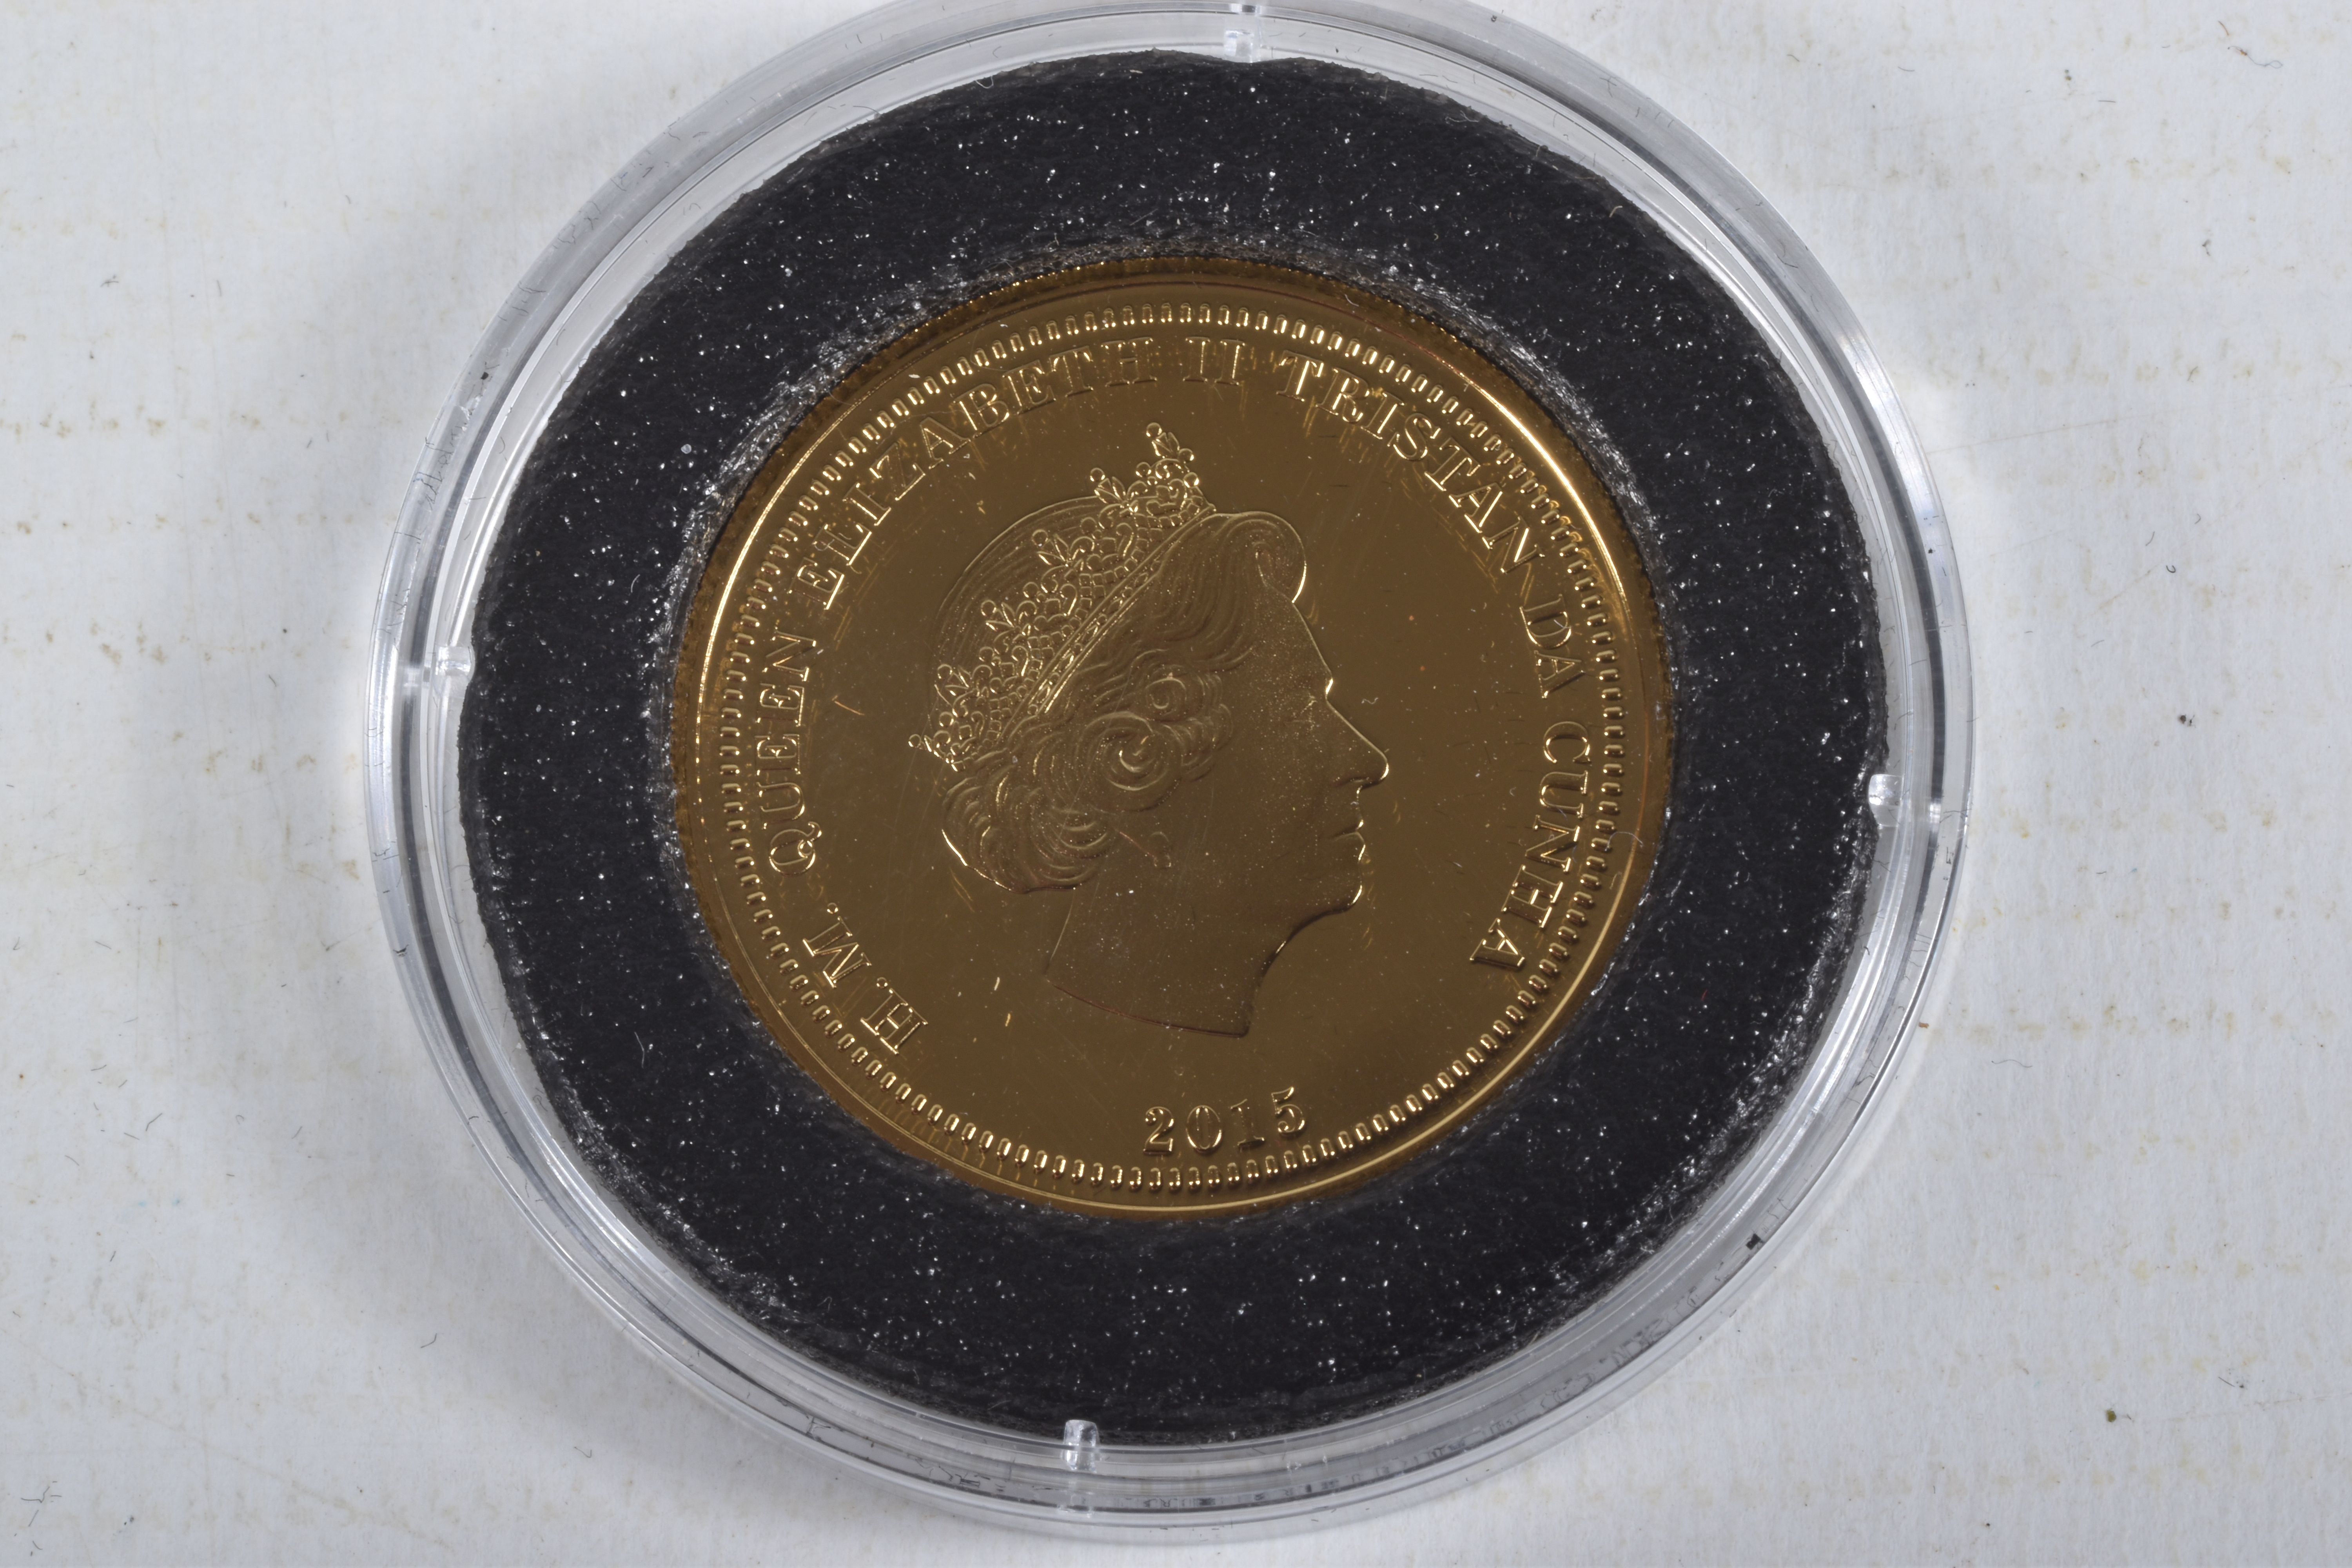 A BOXED DUKE AND DUCHESS OF CAMBRIDGE COMMEMORATIVE GOLD DOUBLE CROWN COIN, 2015, 9ct Gold, 28mm, - Image 3 of 5